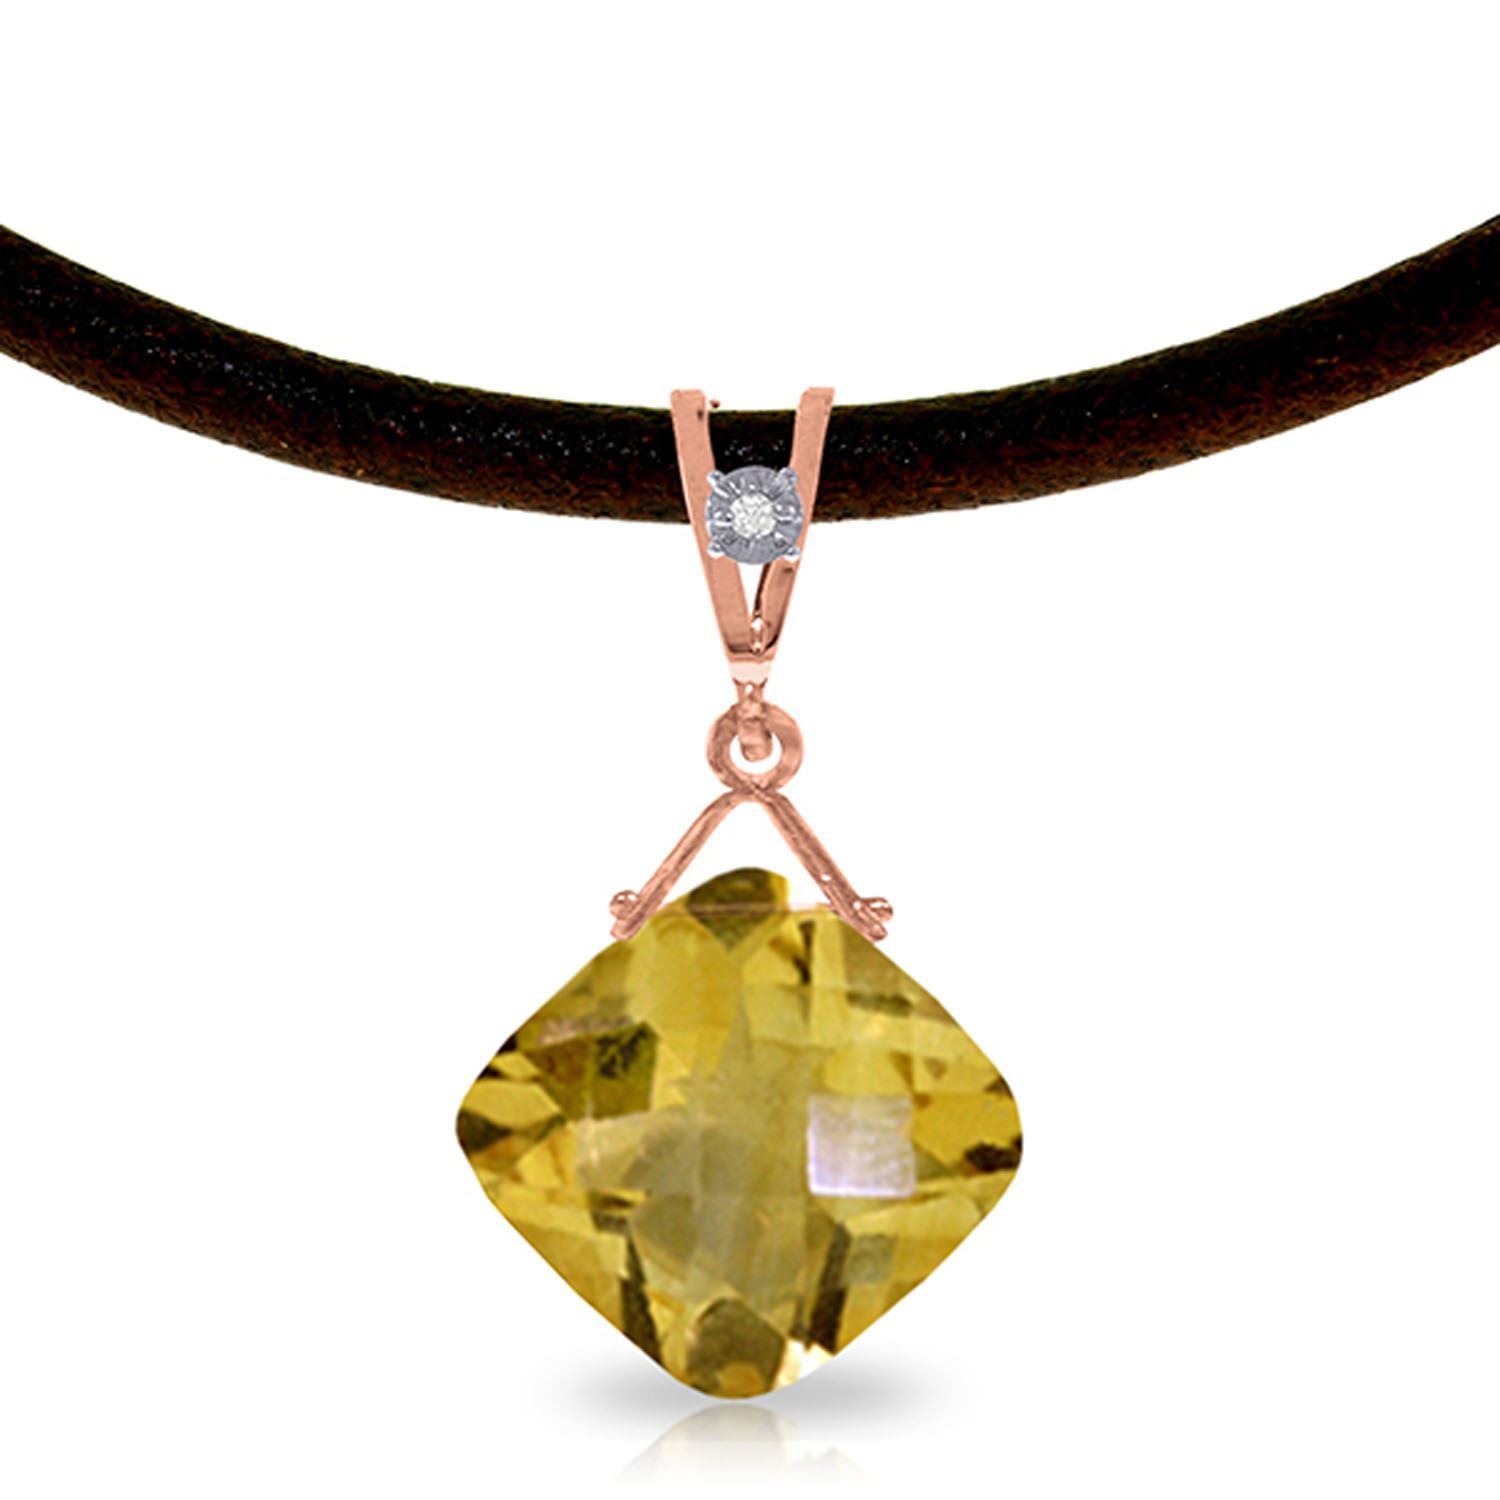 ALARRI 14K Solid Rose Gold & Leather Necklace w/ Natural Citrine with 20 Inch Chain Length